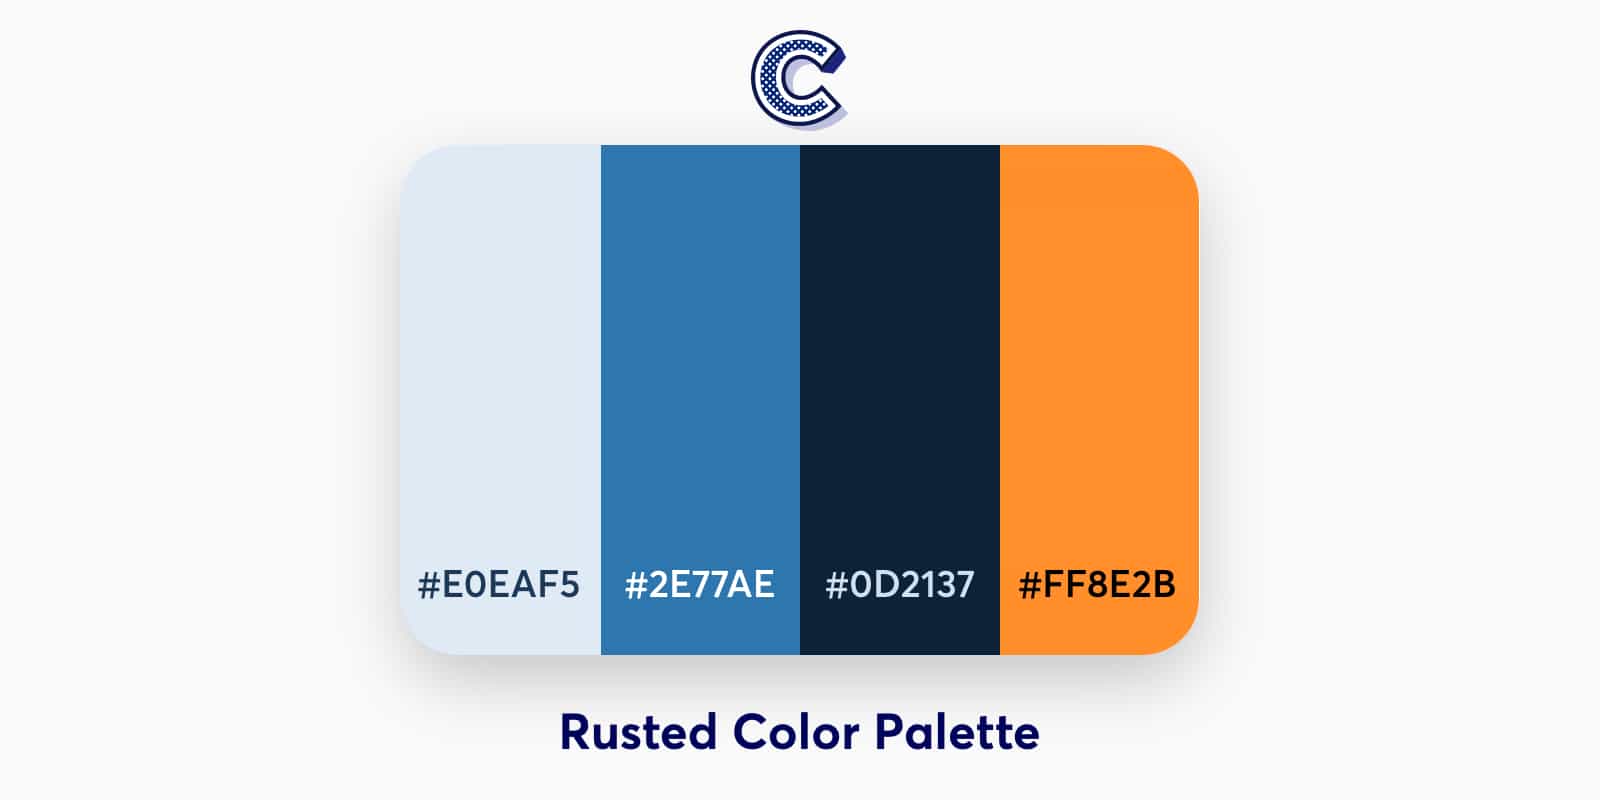 the featured image of rusted color palette